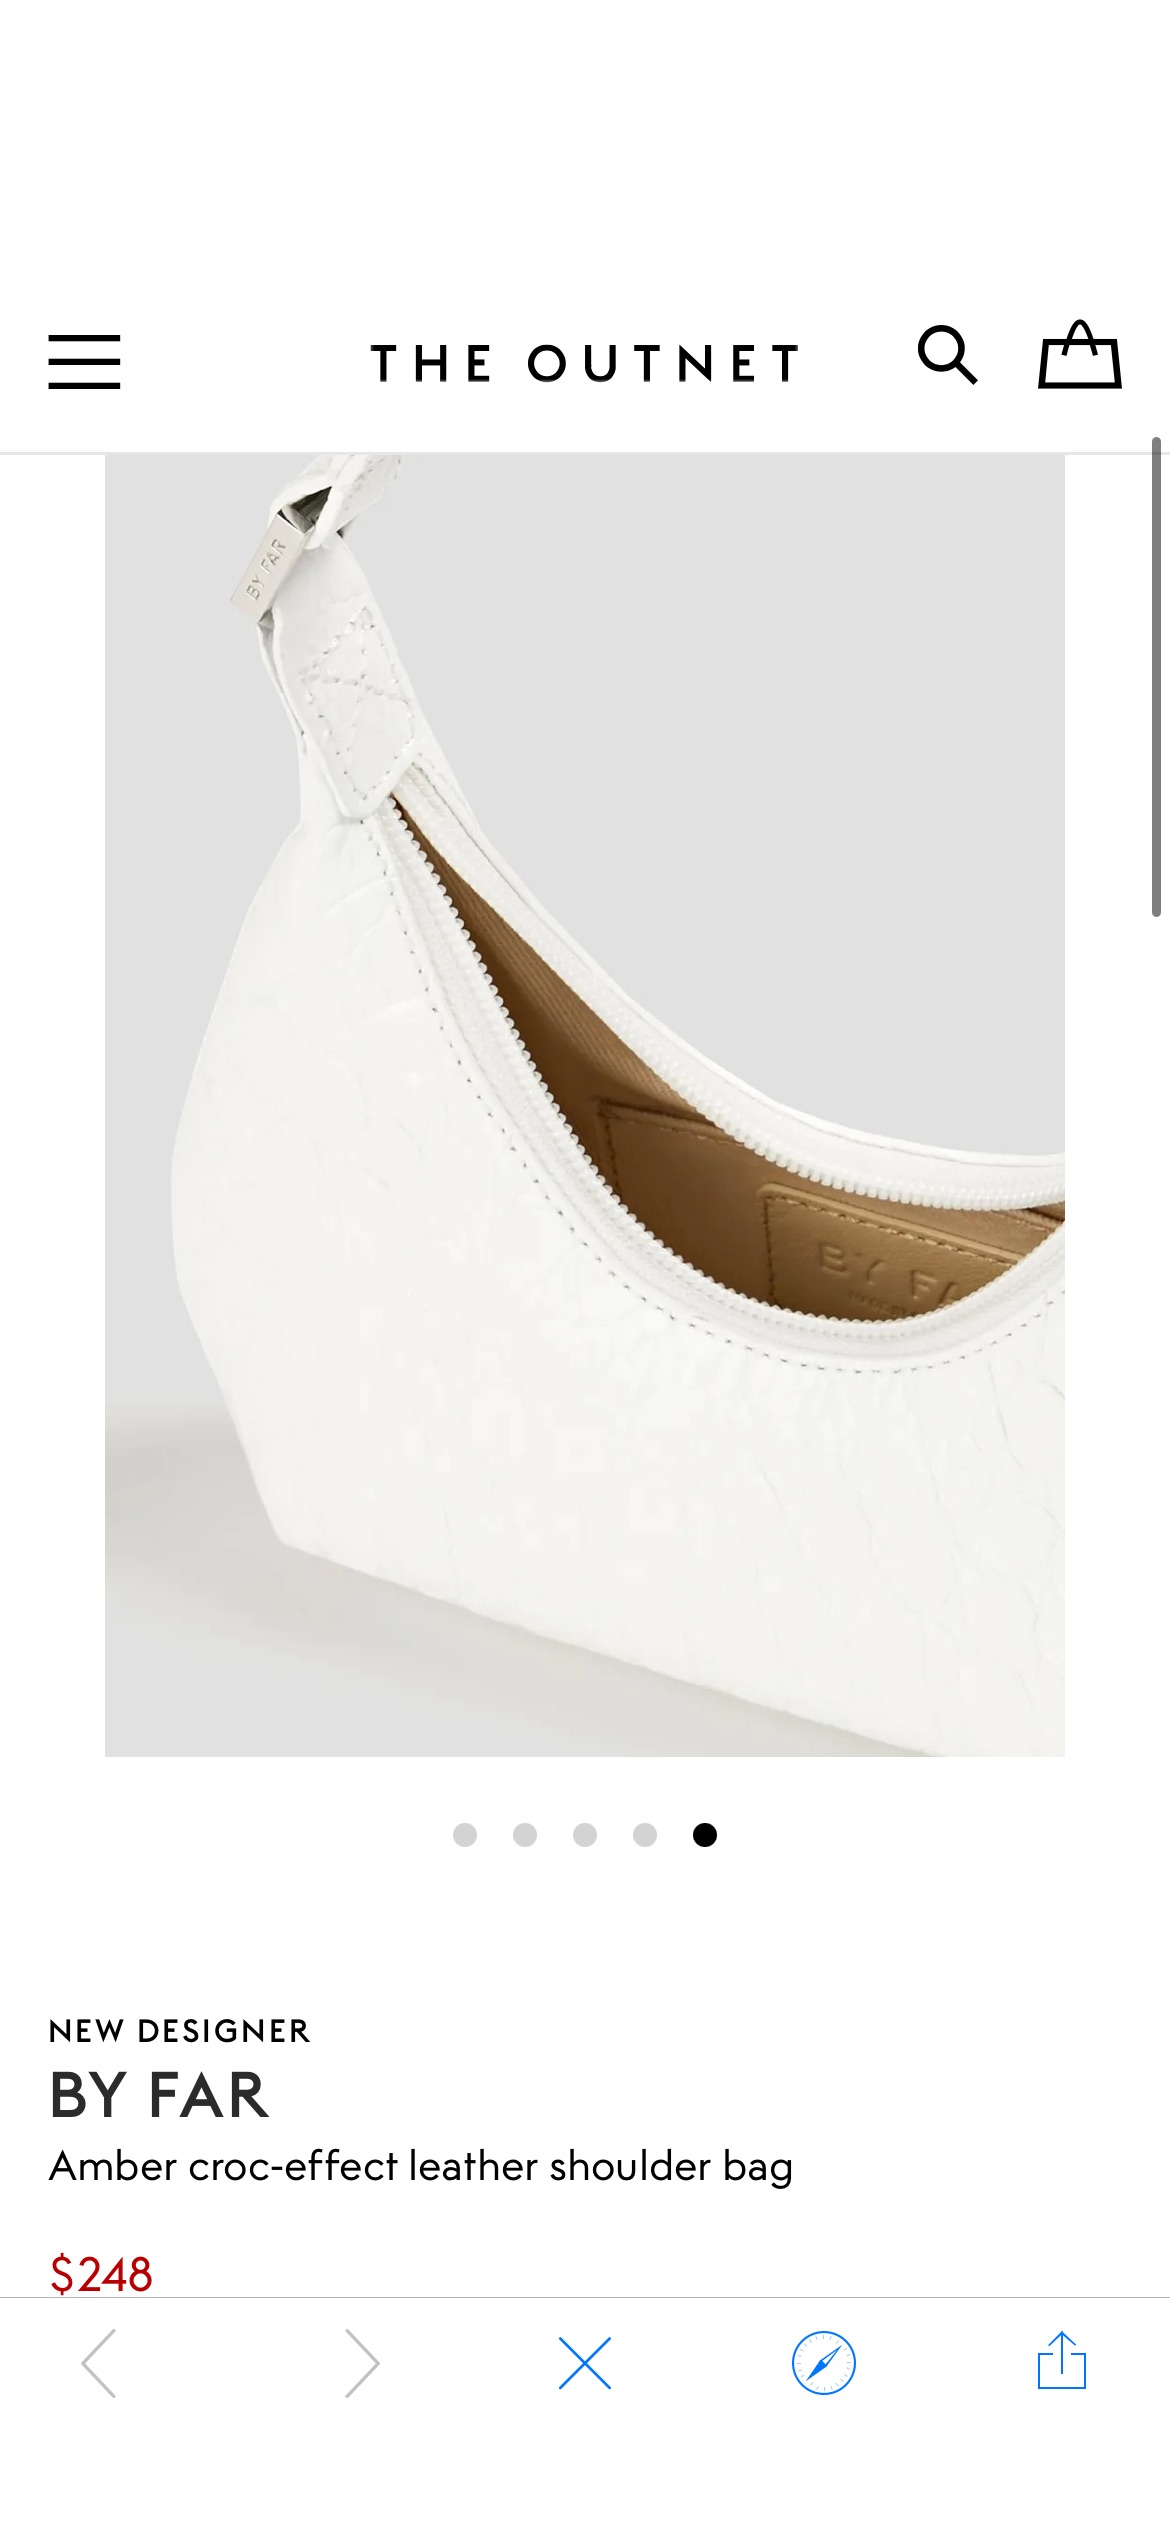 White Amber croc-effect leather shoulder bag | BY FAR | THE OUTNET